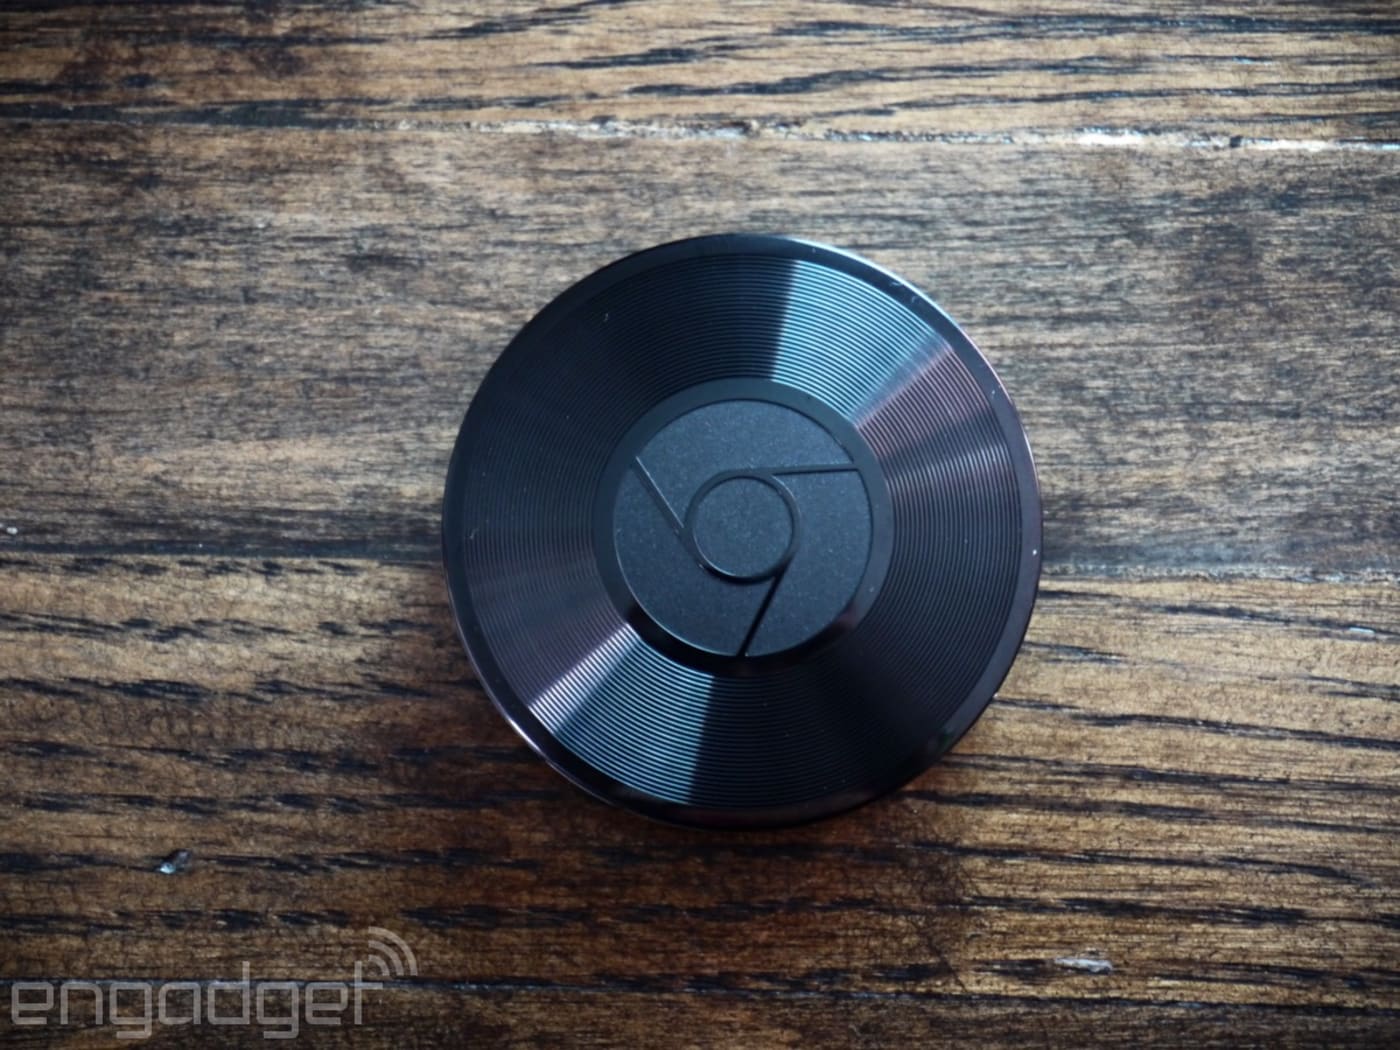 Buy a $30 Chromecast and Google will give you $20